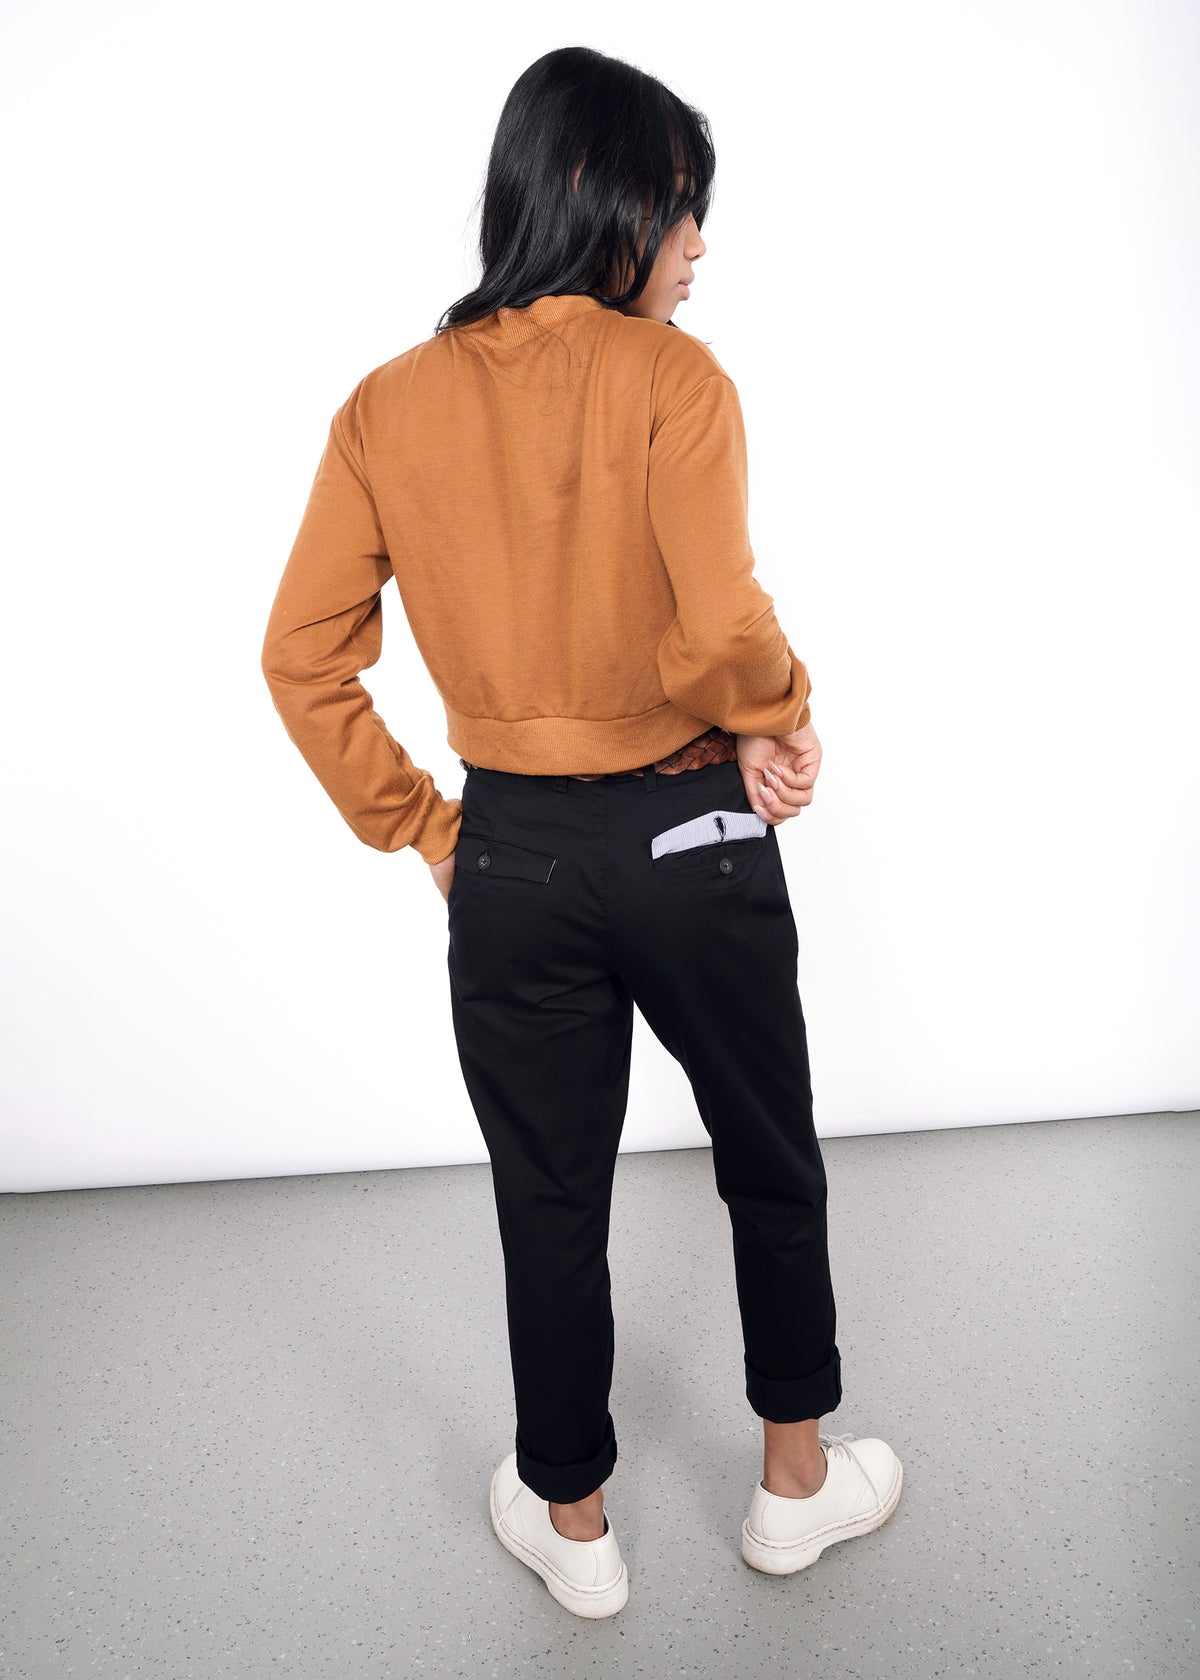 Back view of model wearing black essential trouser in size 2, lifting one pocket open to display interior lining